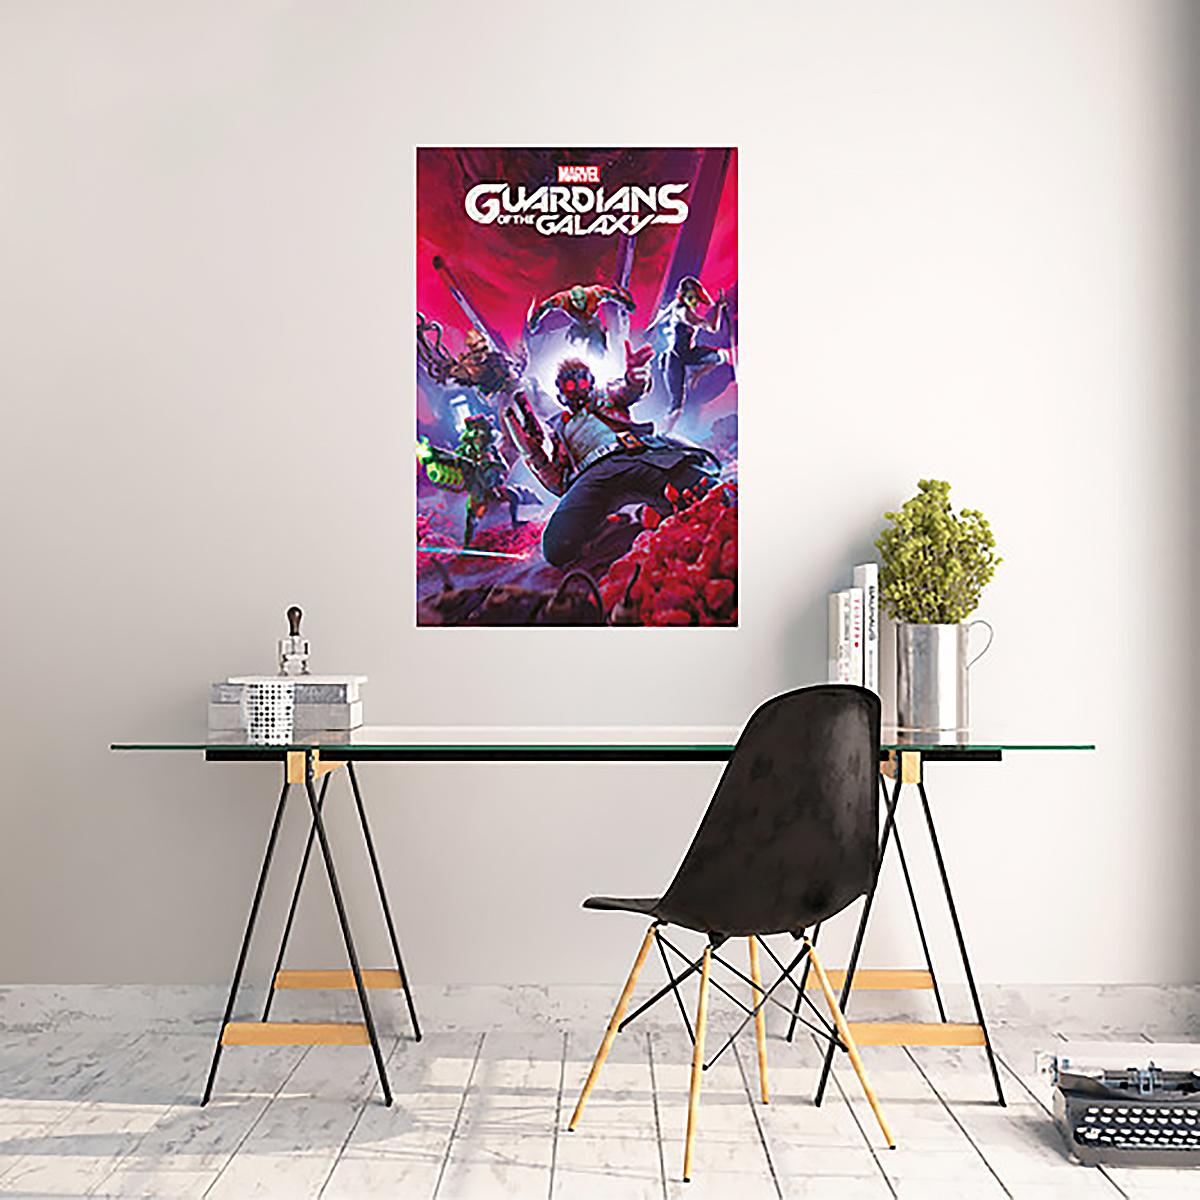 GRUPO ERIK EDITORES Guardians Poster Galaxy the Poster Cover of Videospiel